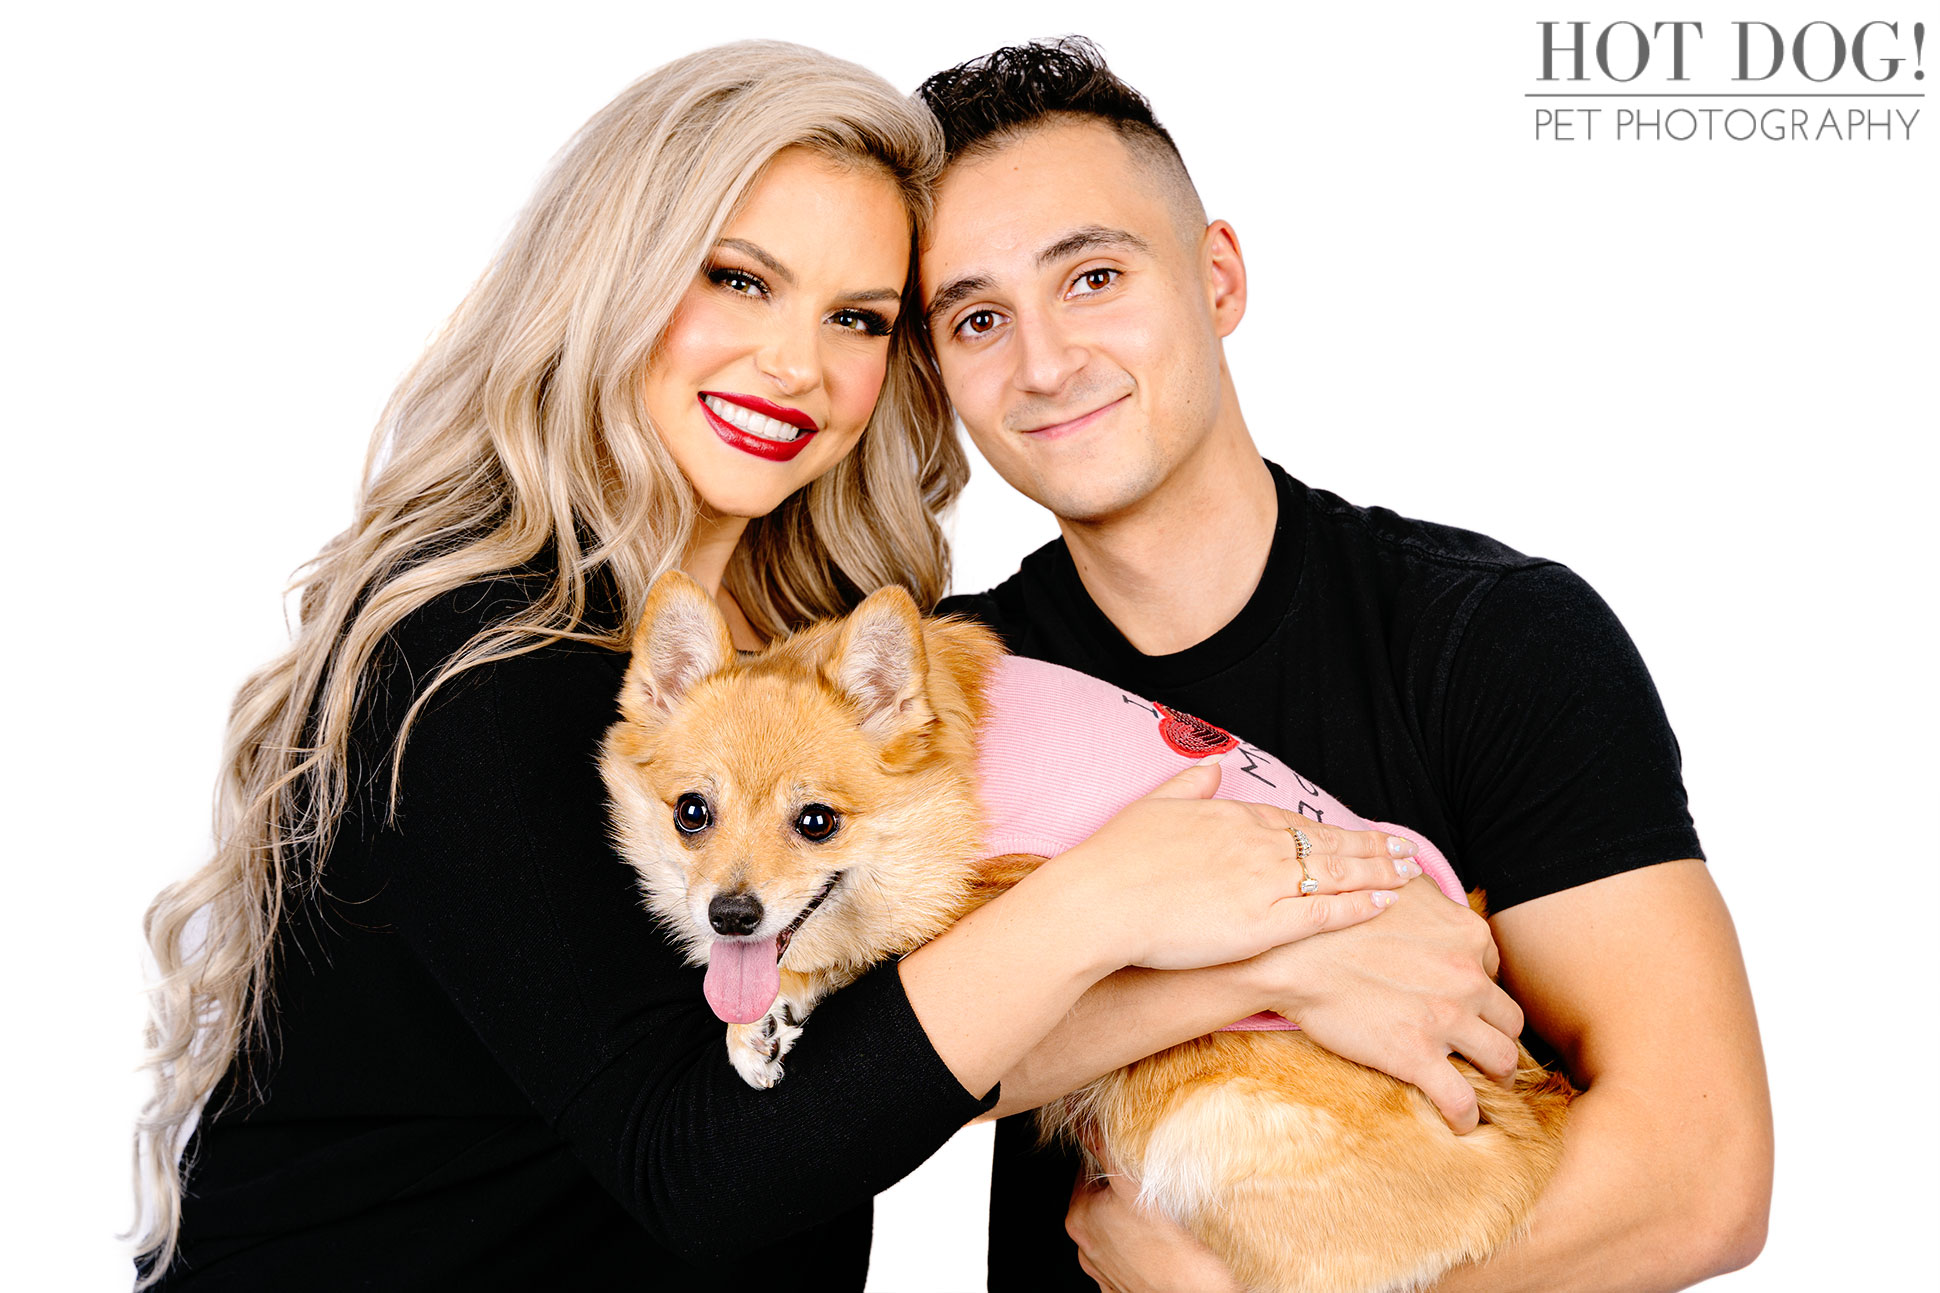 Hot Dog! Pet Photography is the premier pet photography studio in the area, and this photo session with Tinkerbelle the Toy Pomeranian Corgi mix is proof of their talent.